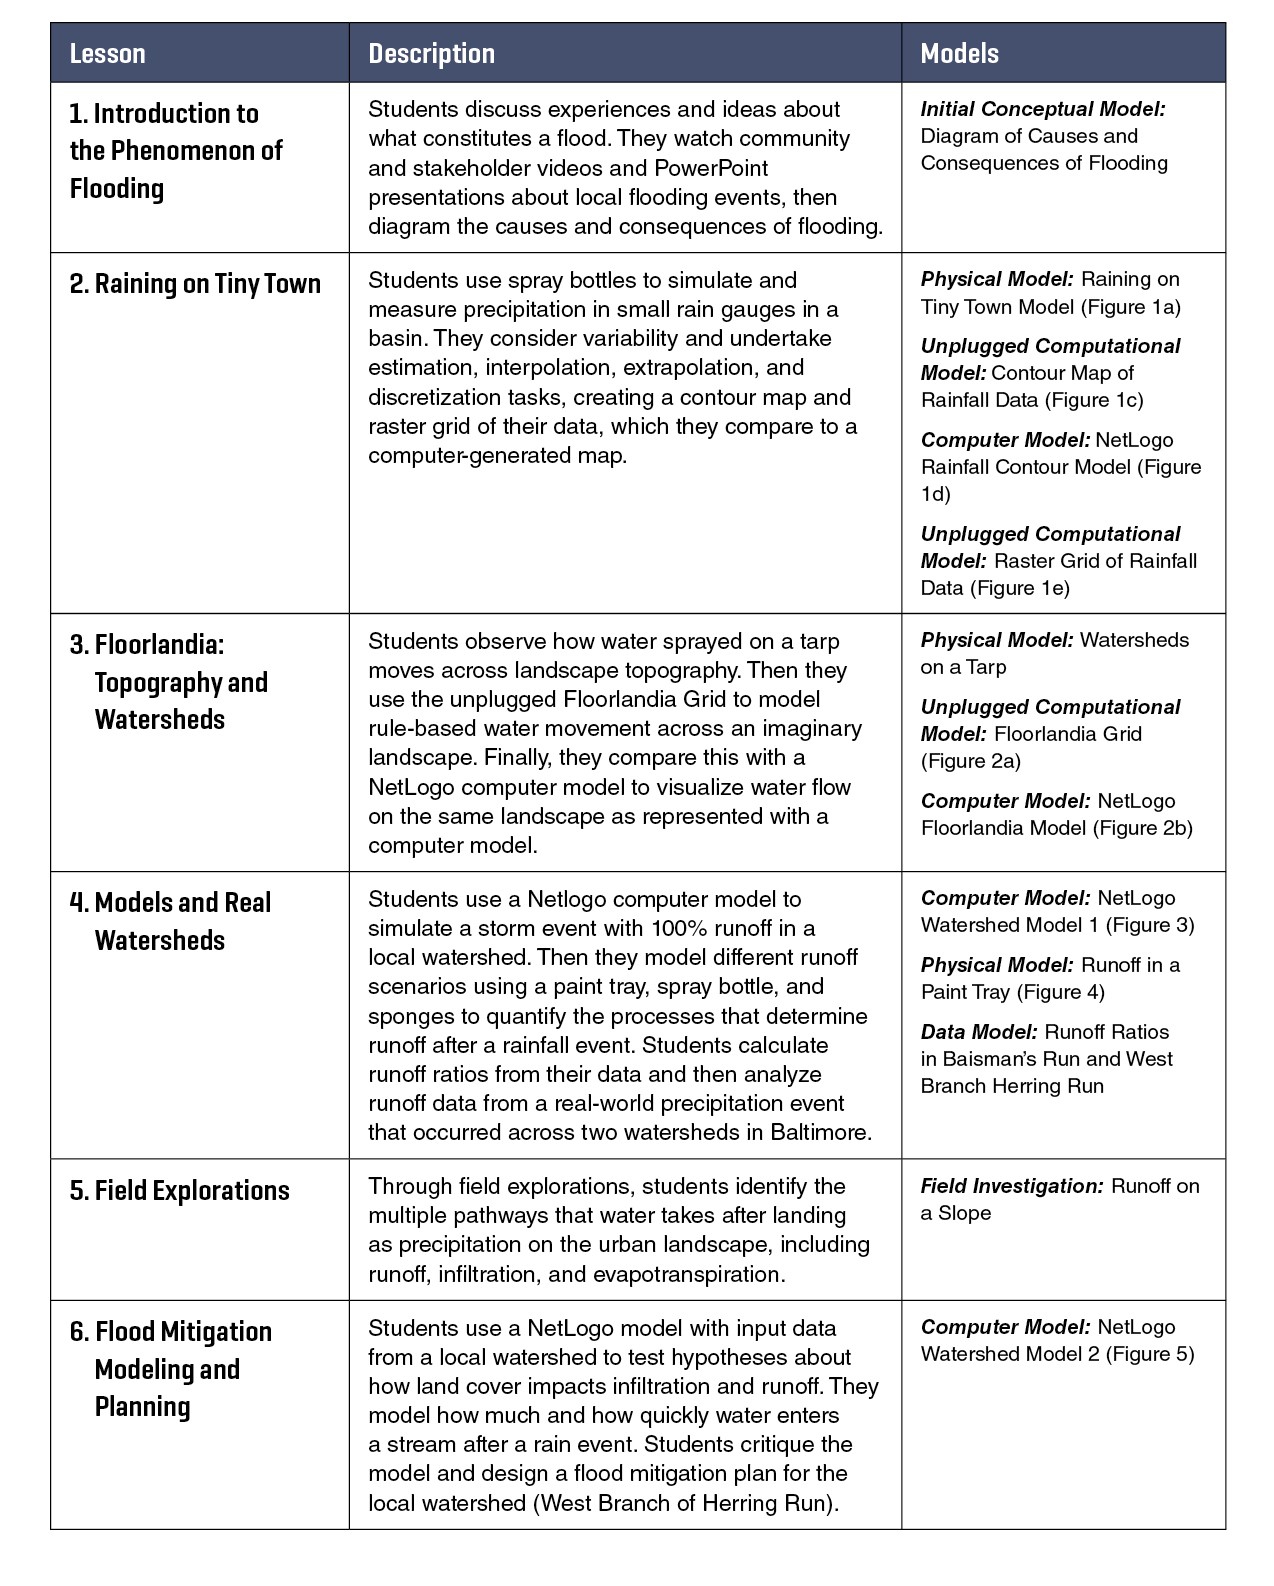 Table 2. Baltimore Floods Lessons and Associated Models